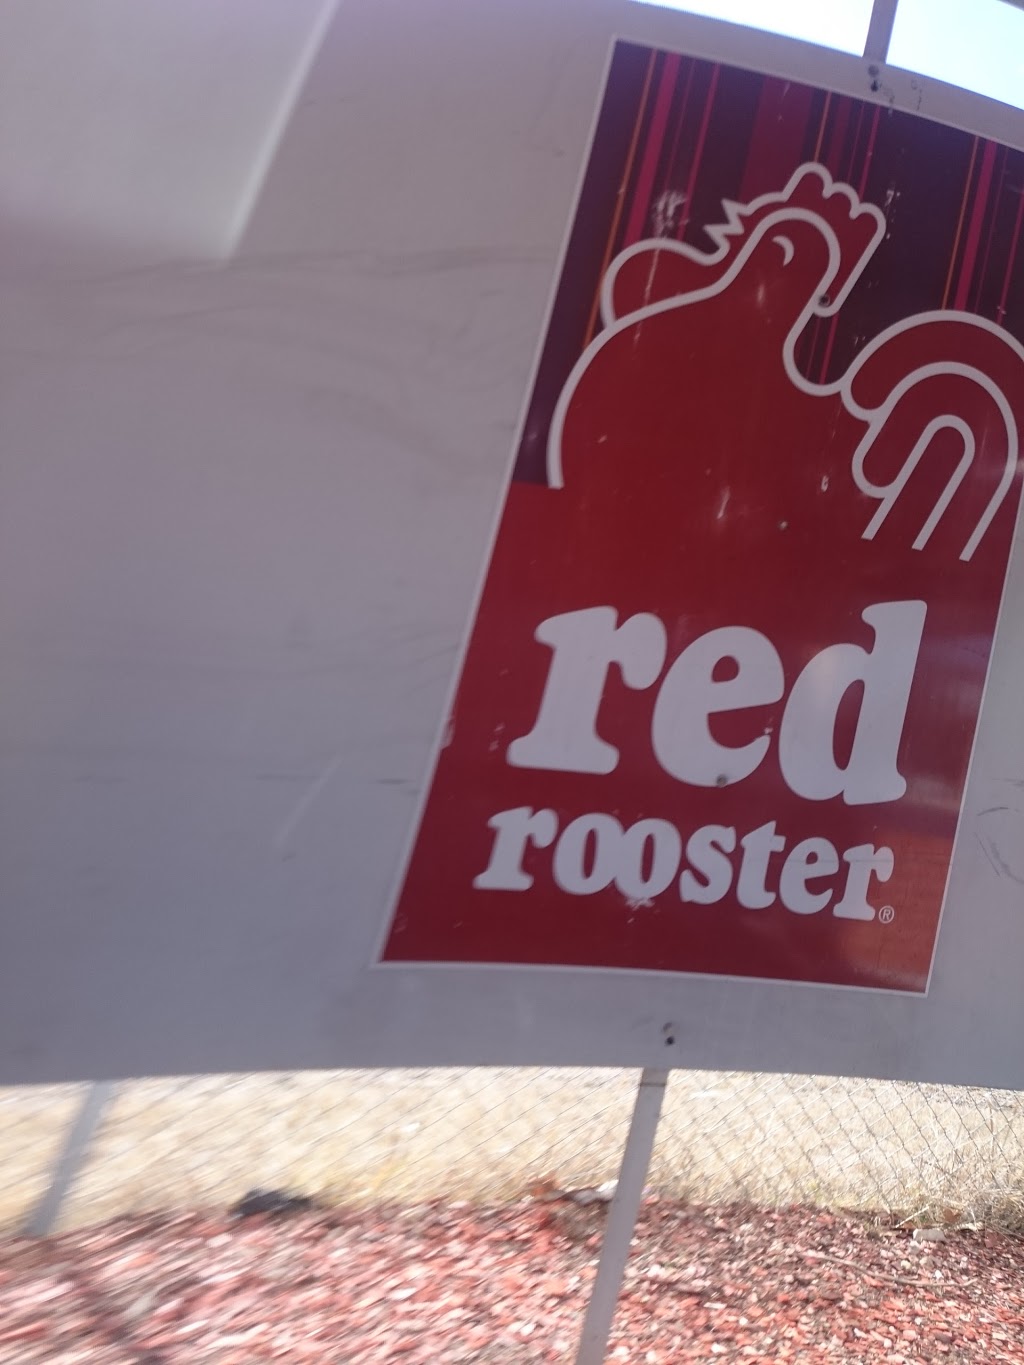 Red Rooster | Langdon Ave & Rylah Cres, Wanniassa ACT 2903, Australia | Phone: (02) 6296 3180